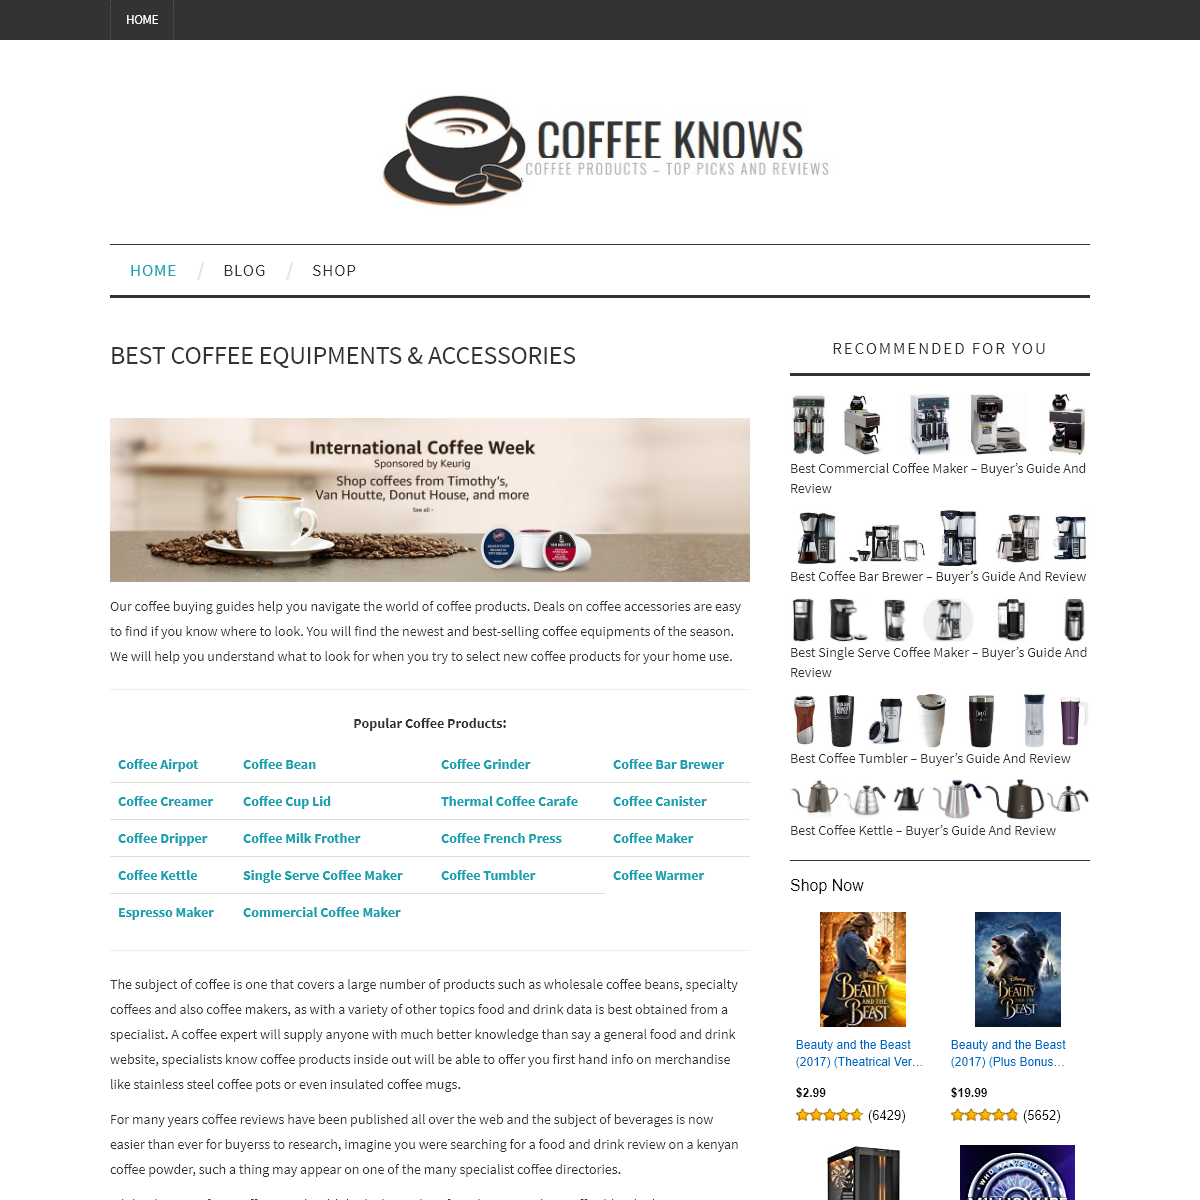 A complete backup of coffeeknows.com